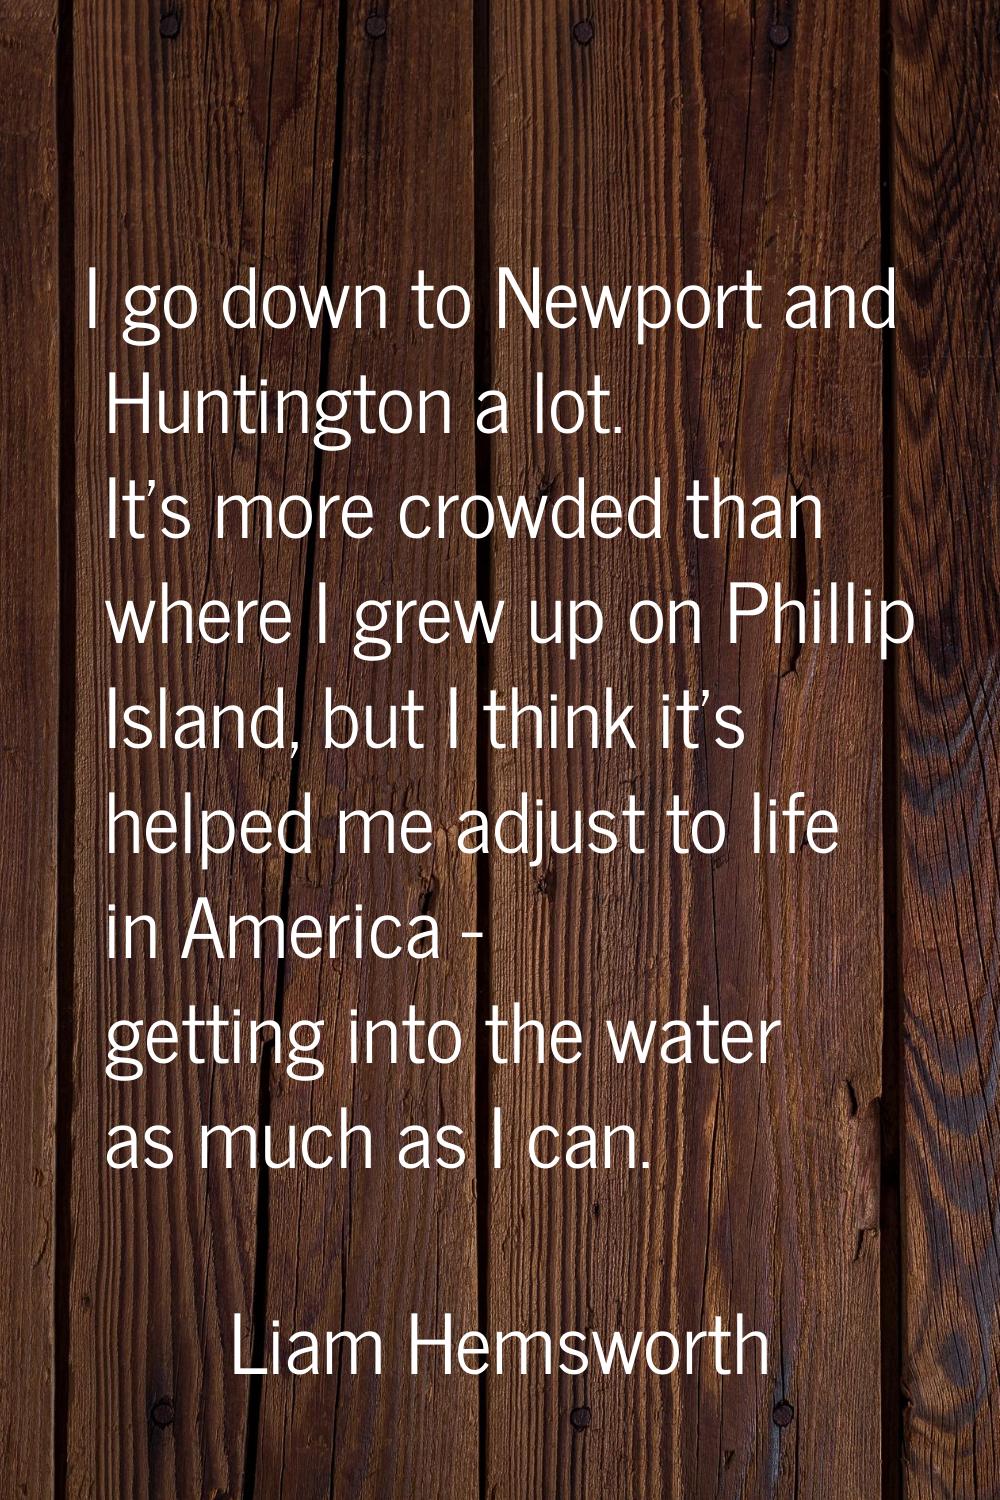 I go down to Newport and Huntington a lot. It's more crowded than where I grew up on Phillip Island